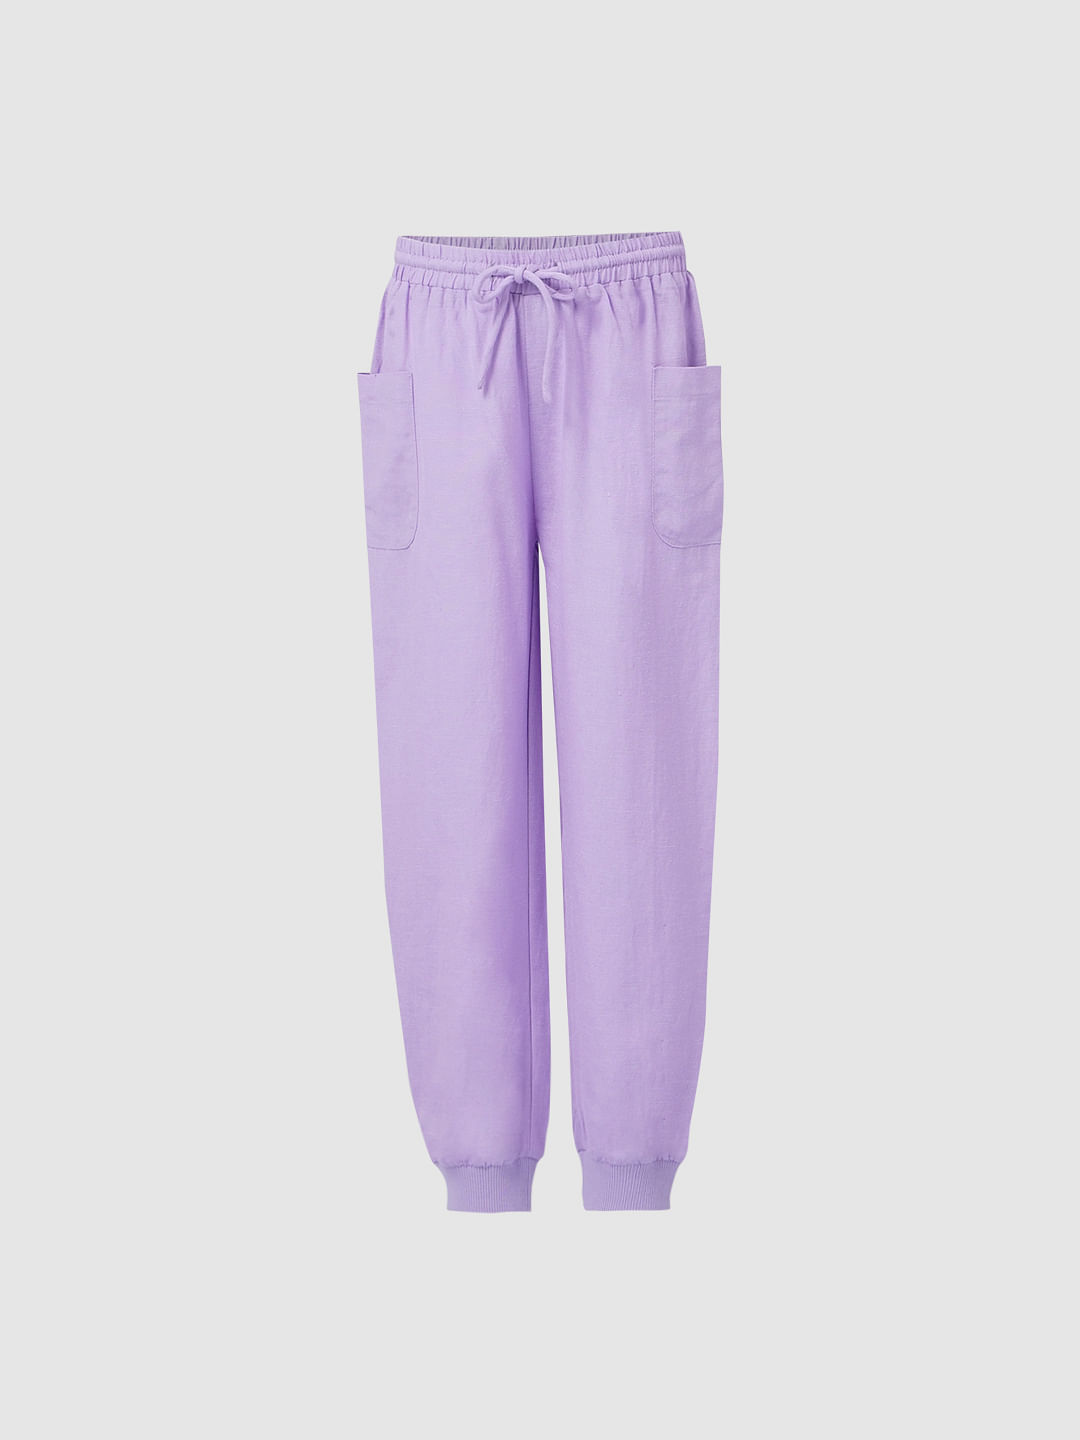 Joggers  Joggers For Girls  Joggers For Girls 20202021  Stylish Joggers  pants Ideas For Girls   YouTube